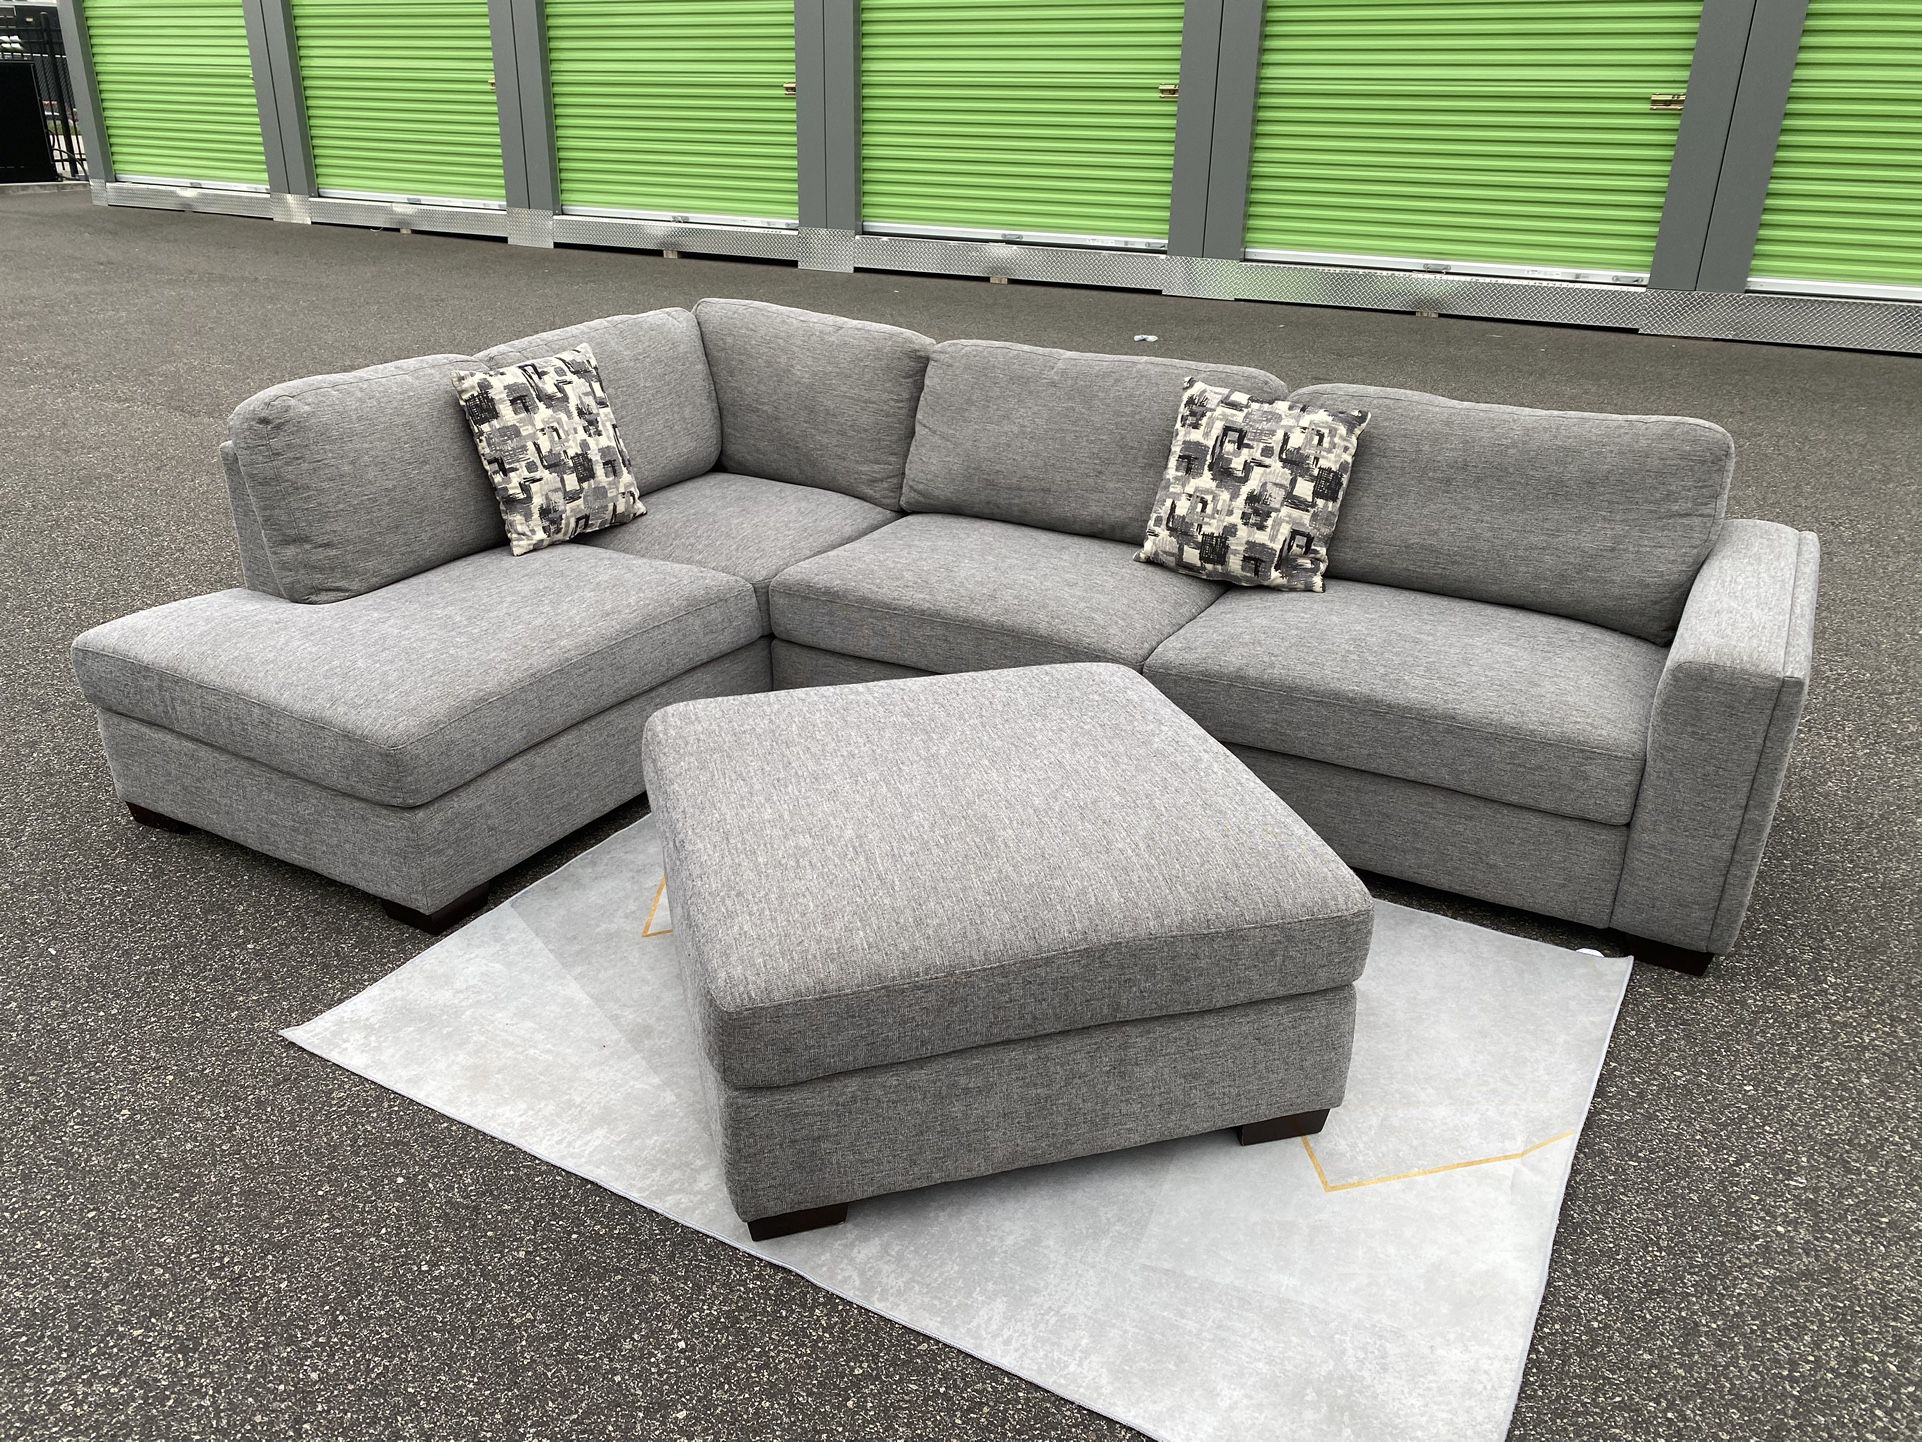 FREE DELIVERY AND INSTALLATION - Maycen Fabric Sectional Gray Color (Pillows and Ottoman Included)